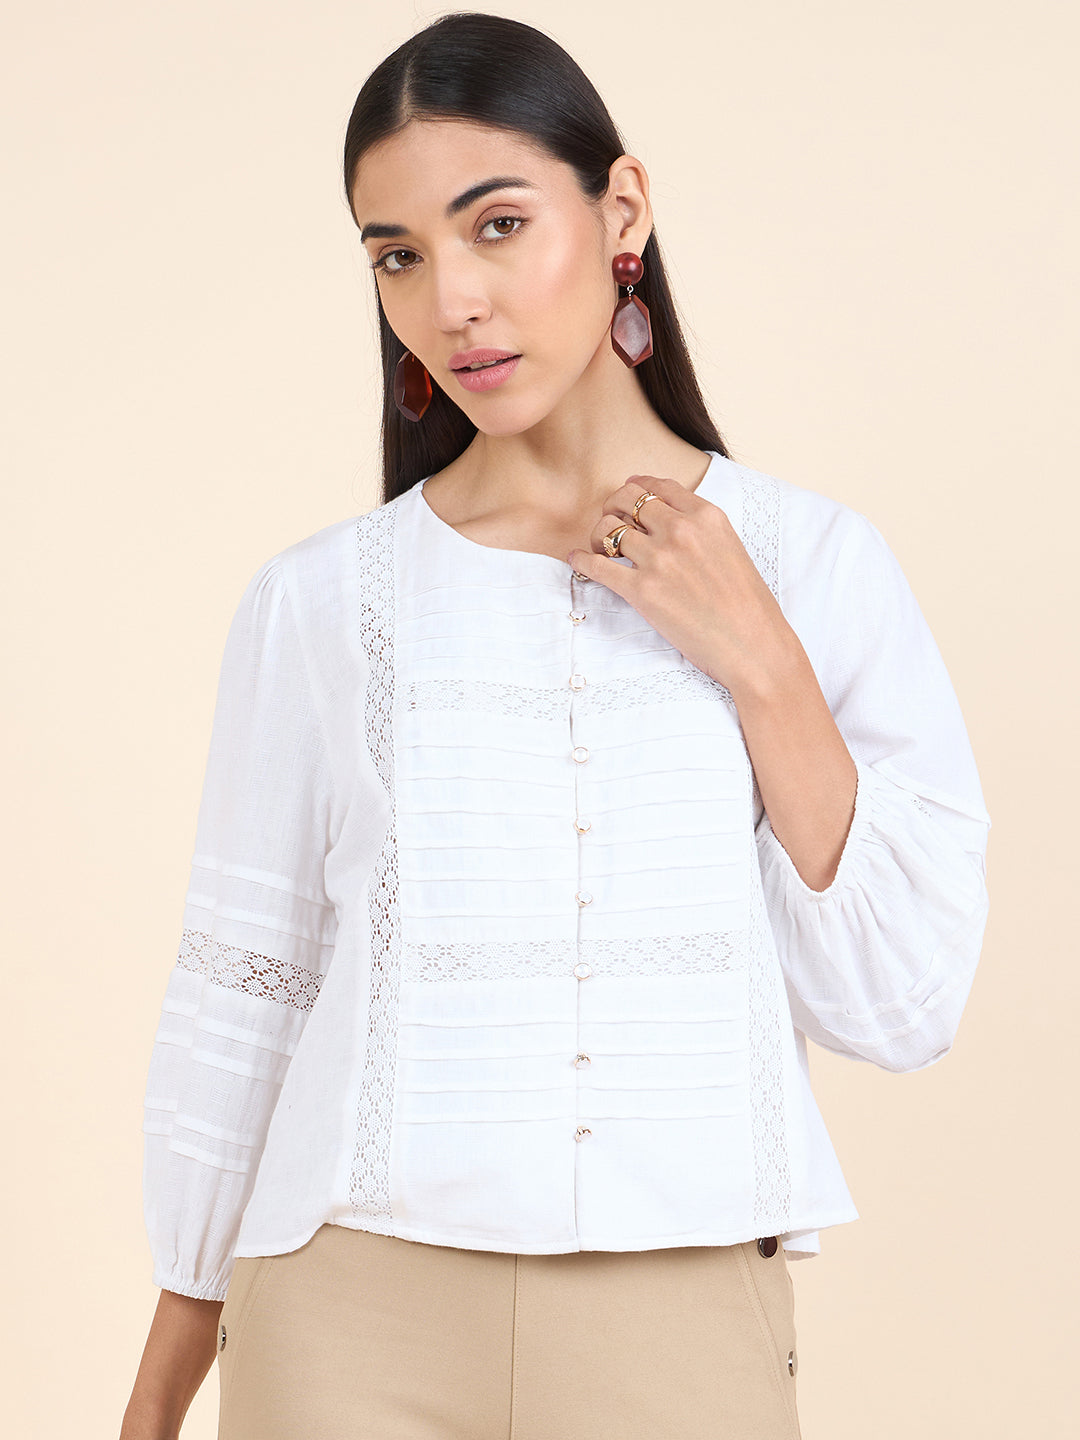 Gipsy Stylish Women Tops Summer White Collection